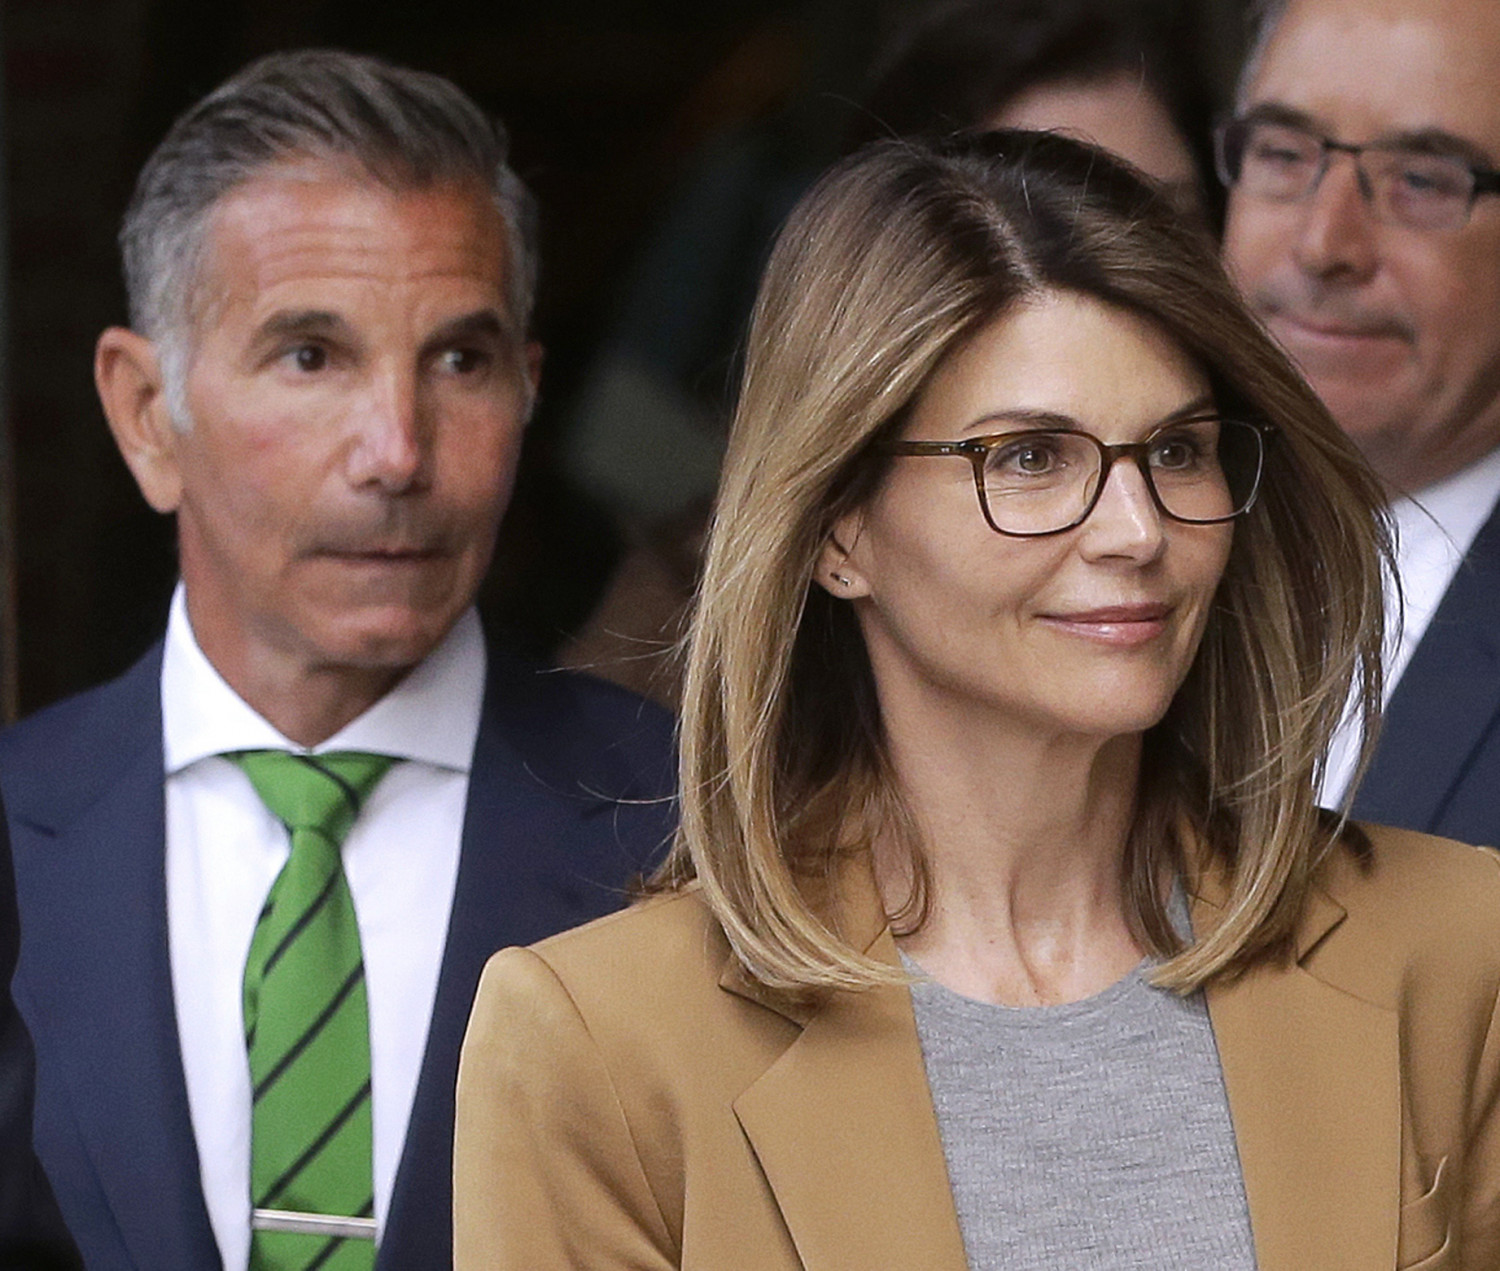 Lori Loughlin Seen Bonding With Daughter Isabella; Olivia Jade Reportedly Upset About College Scheme